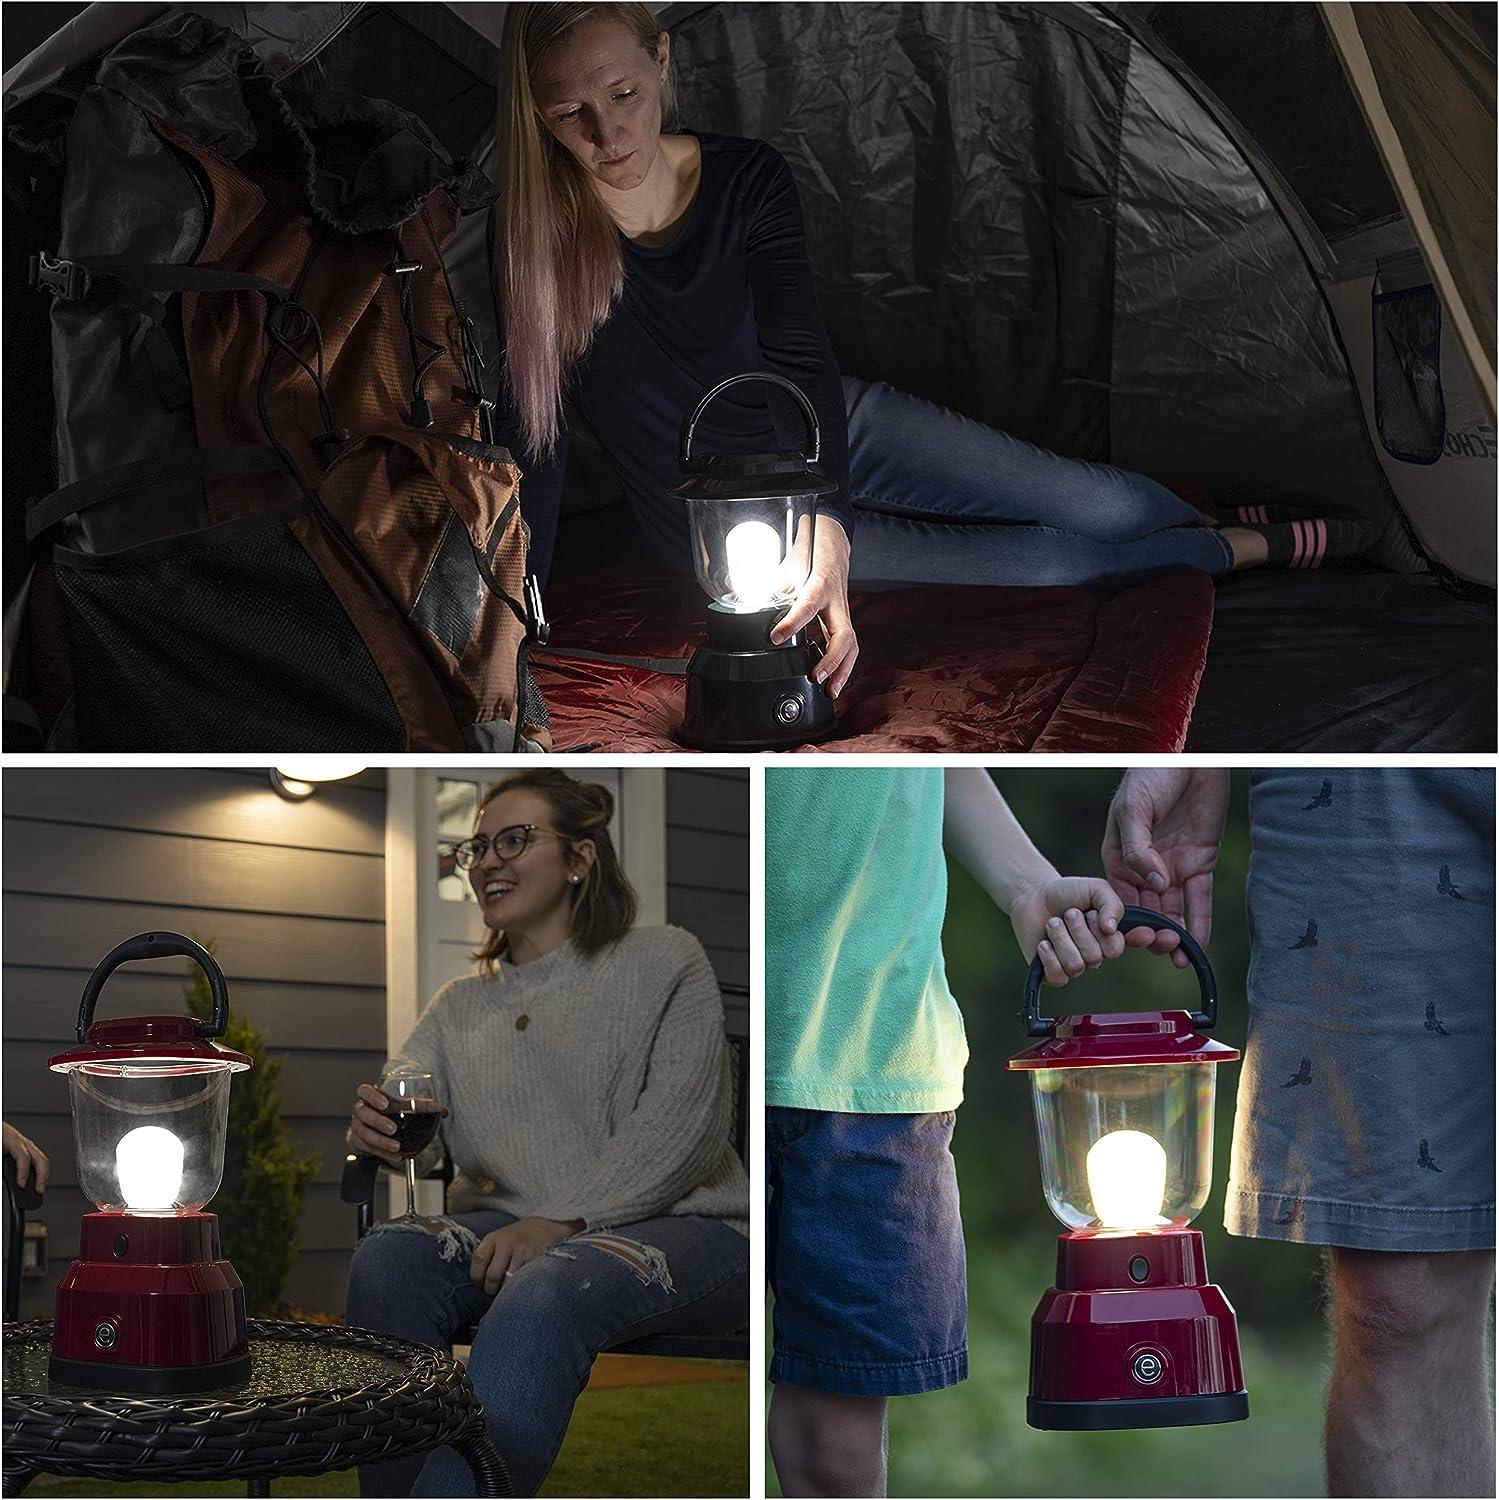 Enbrighten LED Mini Camping Lantern, Battery Powered, 200 Lumens, 40 Hour  Runtime, 3 Modes, Night Light for Kids, Ideal for Hiking, Outdoors